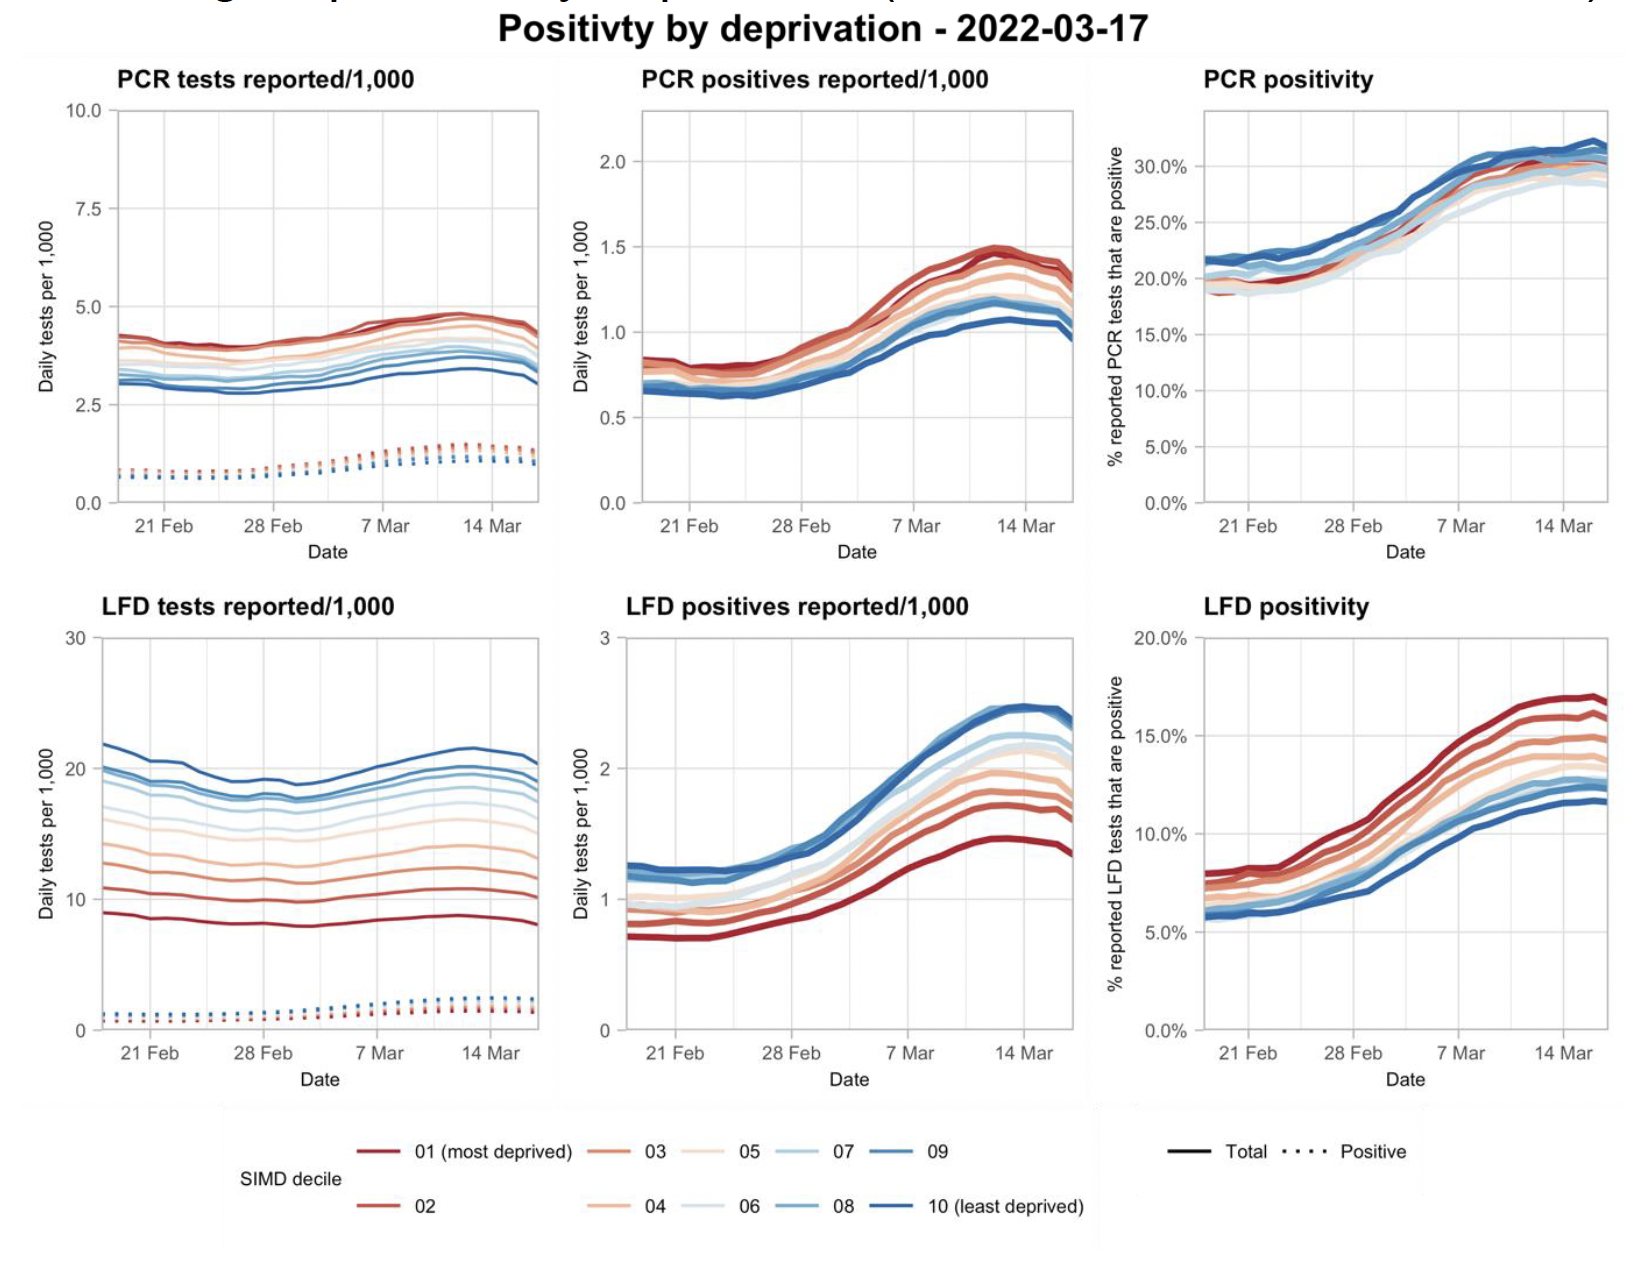 A series of line graphs showing variation in testing outcomes comparing Lateral Flow and PCR testing, separated by deprivation (based on data to 19th March).